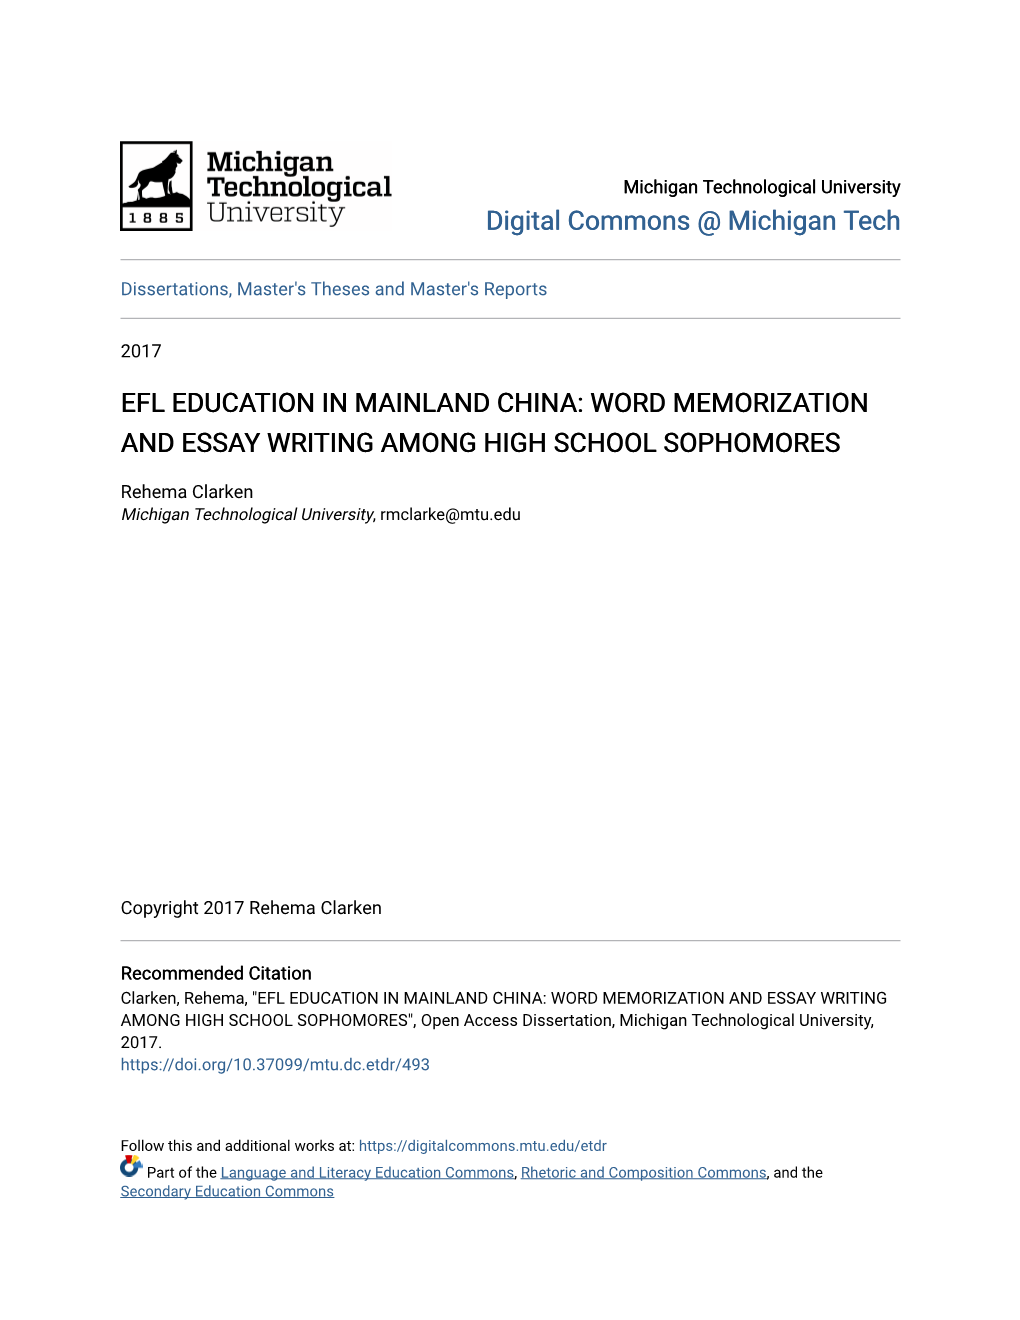 Efl Education in Mainland China: Word Memorization and Essay Writing Among High School Sophomores